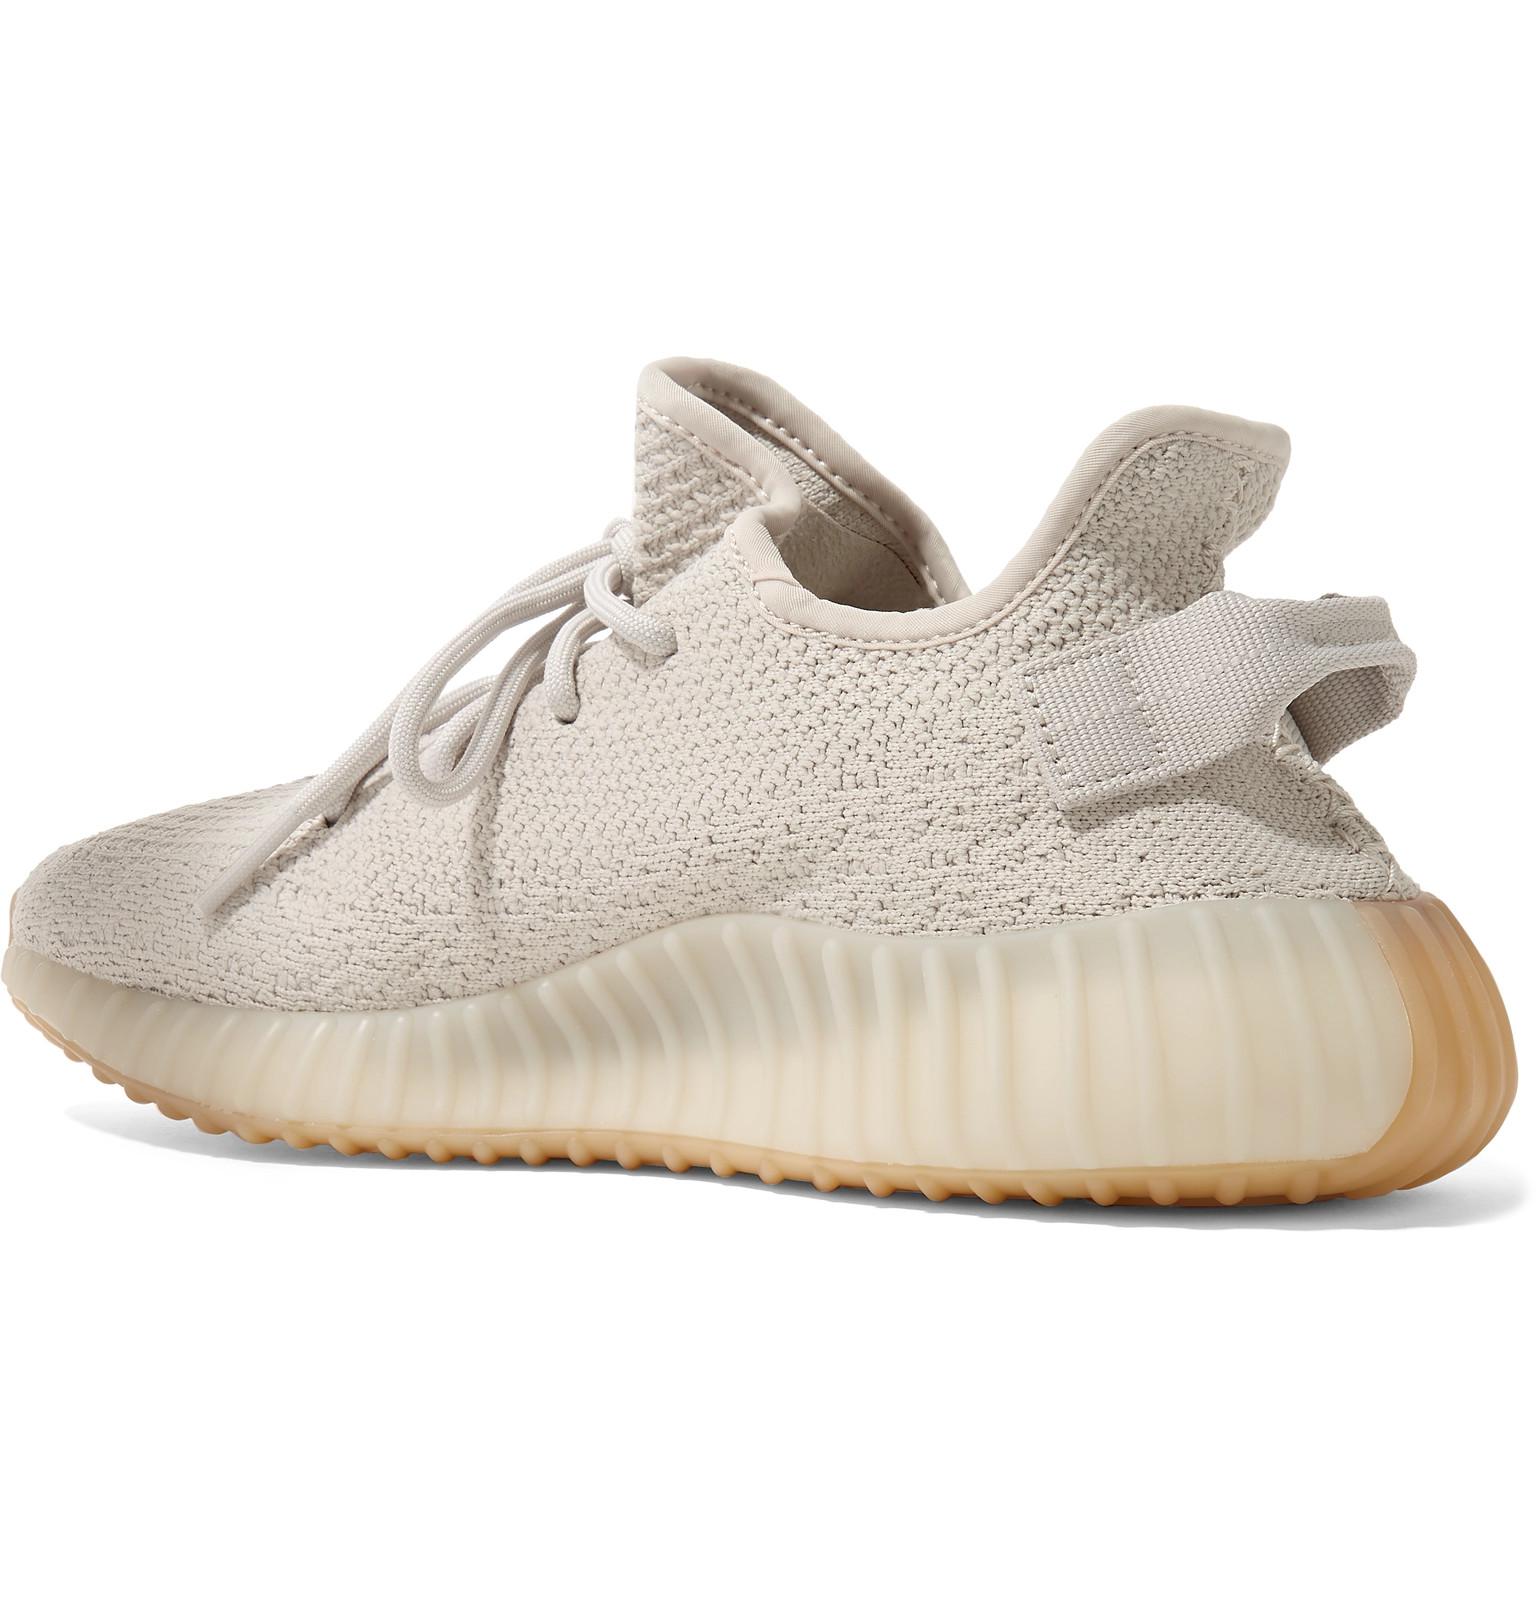 adidas Originals Yeezy Boost 350 V2 Primeknit Sneakers for | Lyst